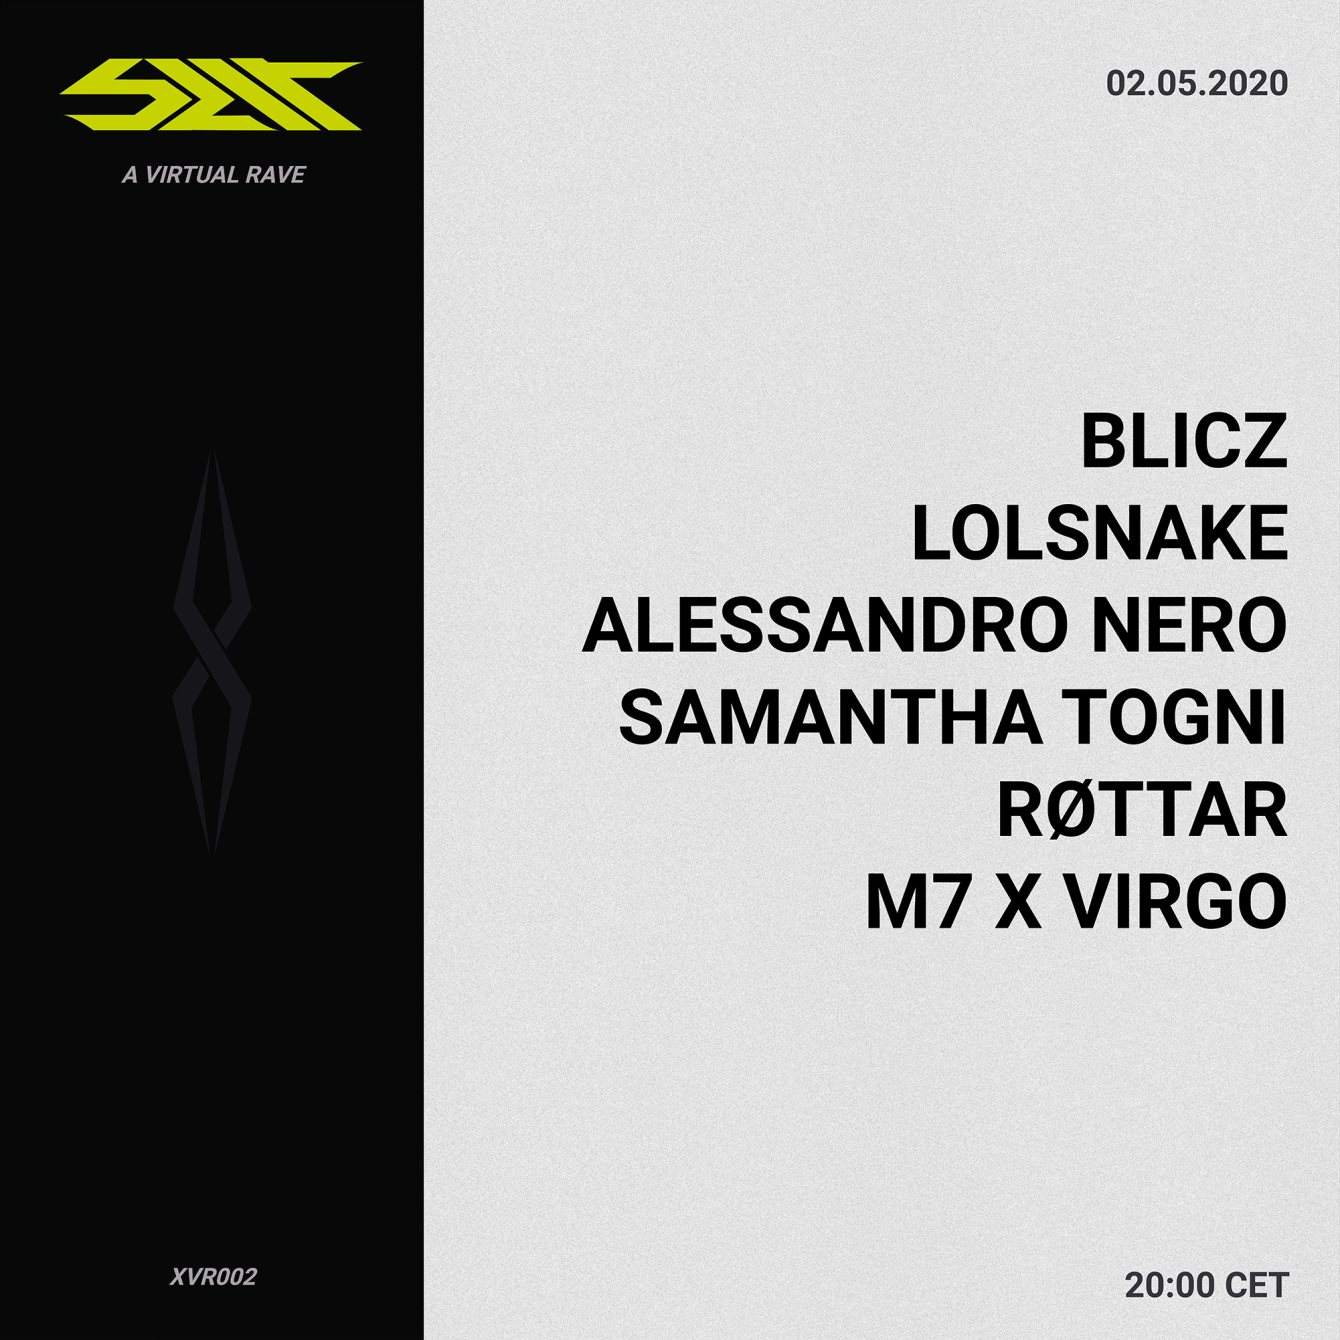 Slit - A Virtual Rave Feat. Blicz, Alessandro Nero, Samantha Togni and More - フライヤー表